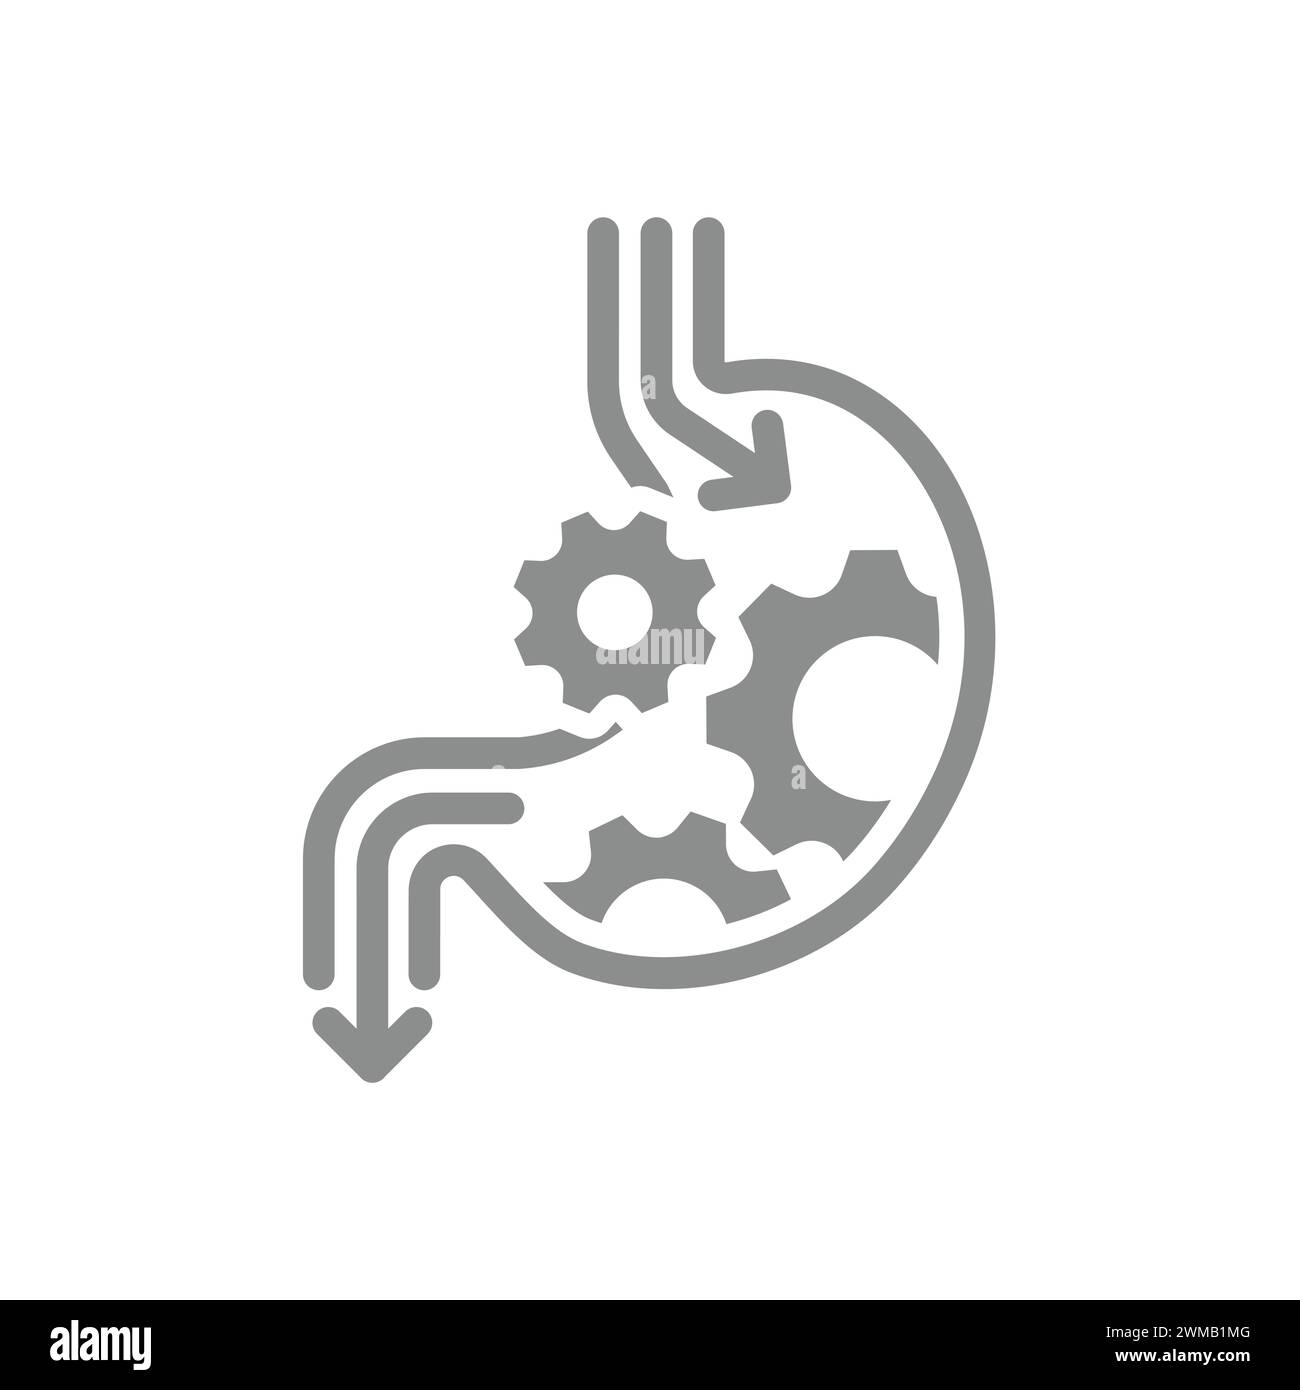 Stomach and gear vector icon. Digestive system and digestion symbol. Stock Vector